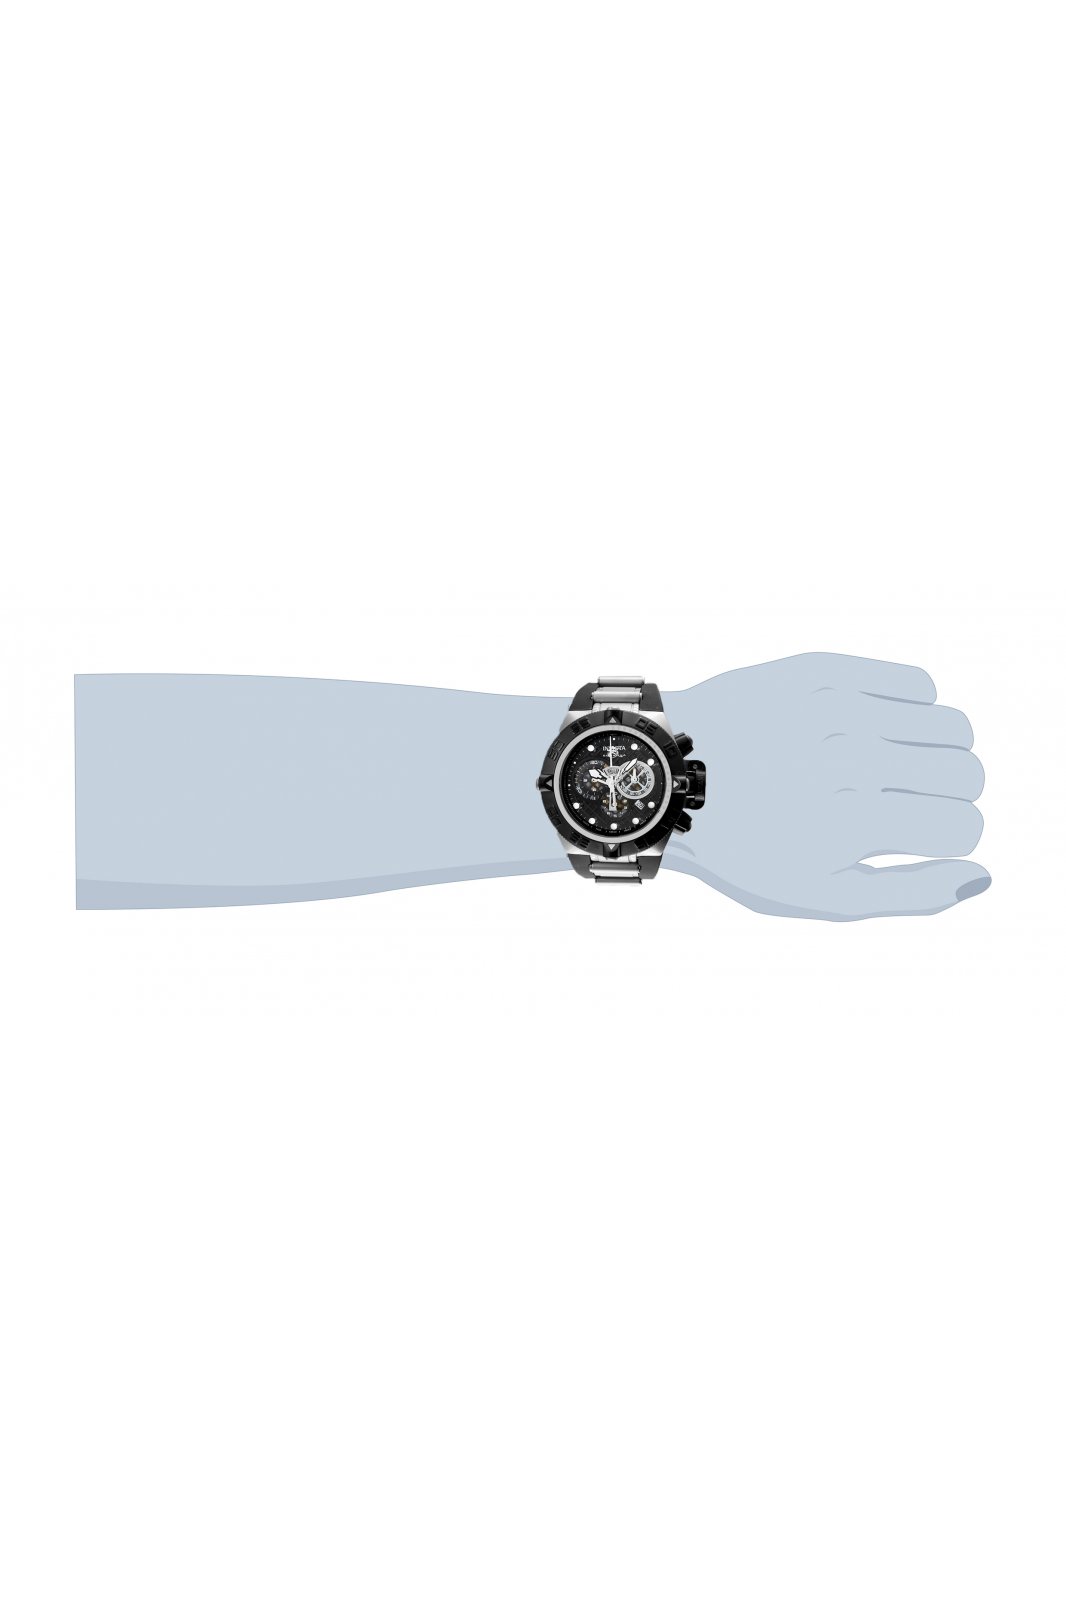 Invicta Watch - IV 6564 - Official Invicta Store - Buy Online!